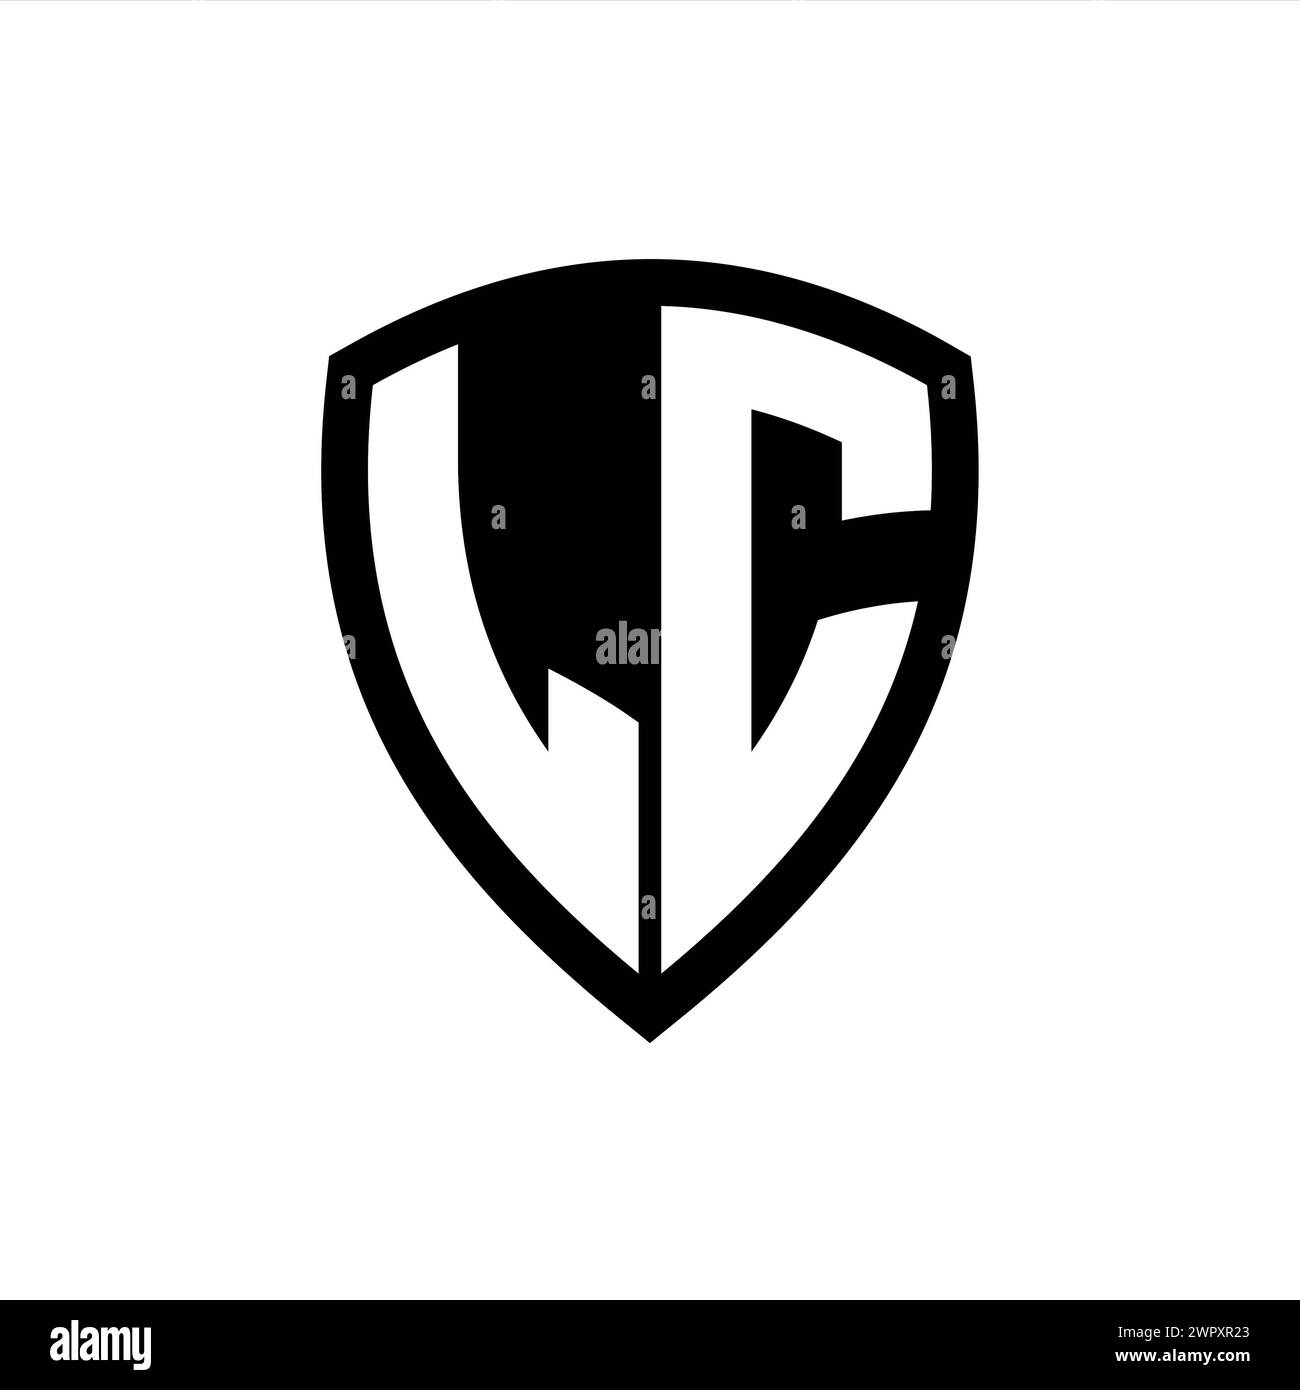 LC monogram logo with bold letters shield shape with black and white color design template Stock Photo